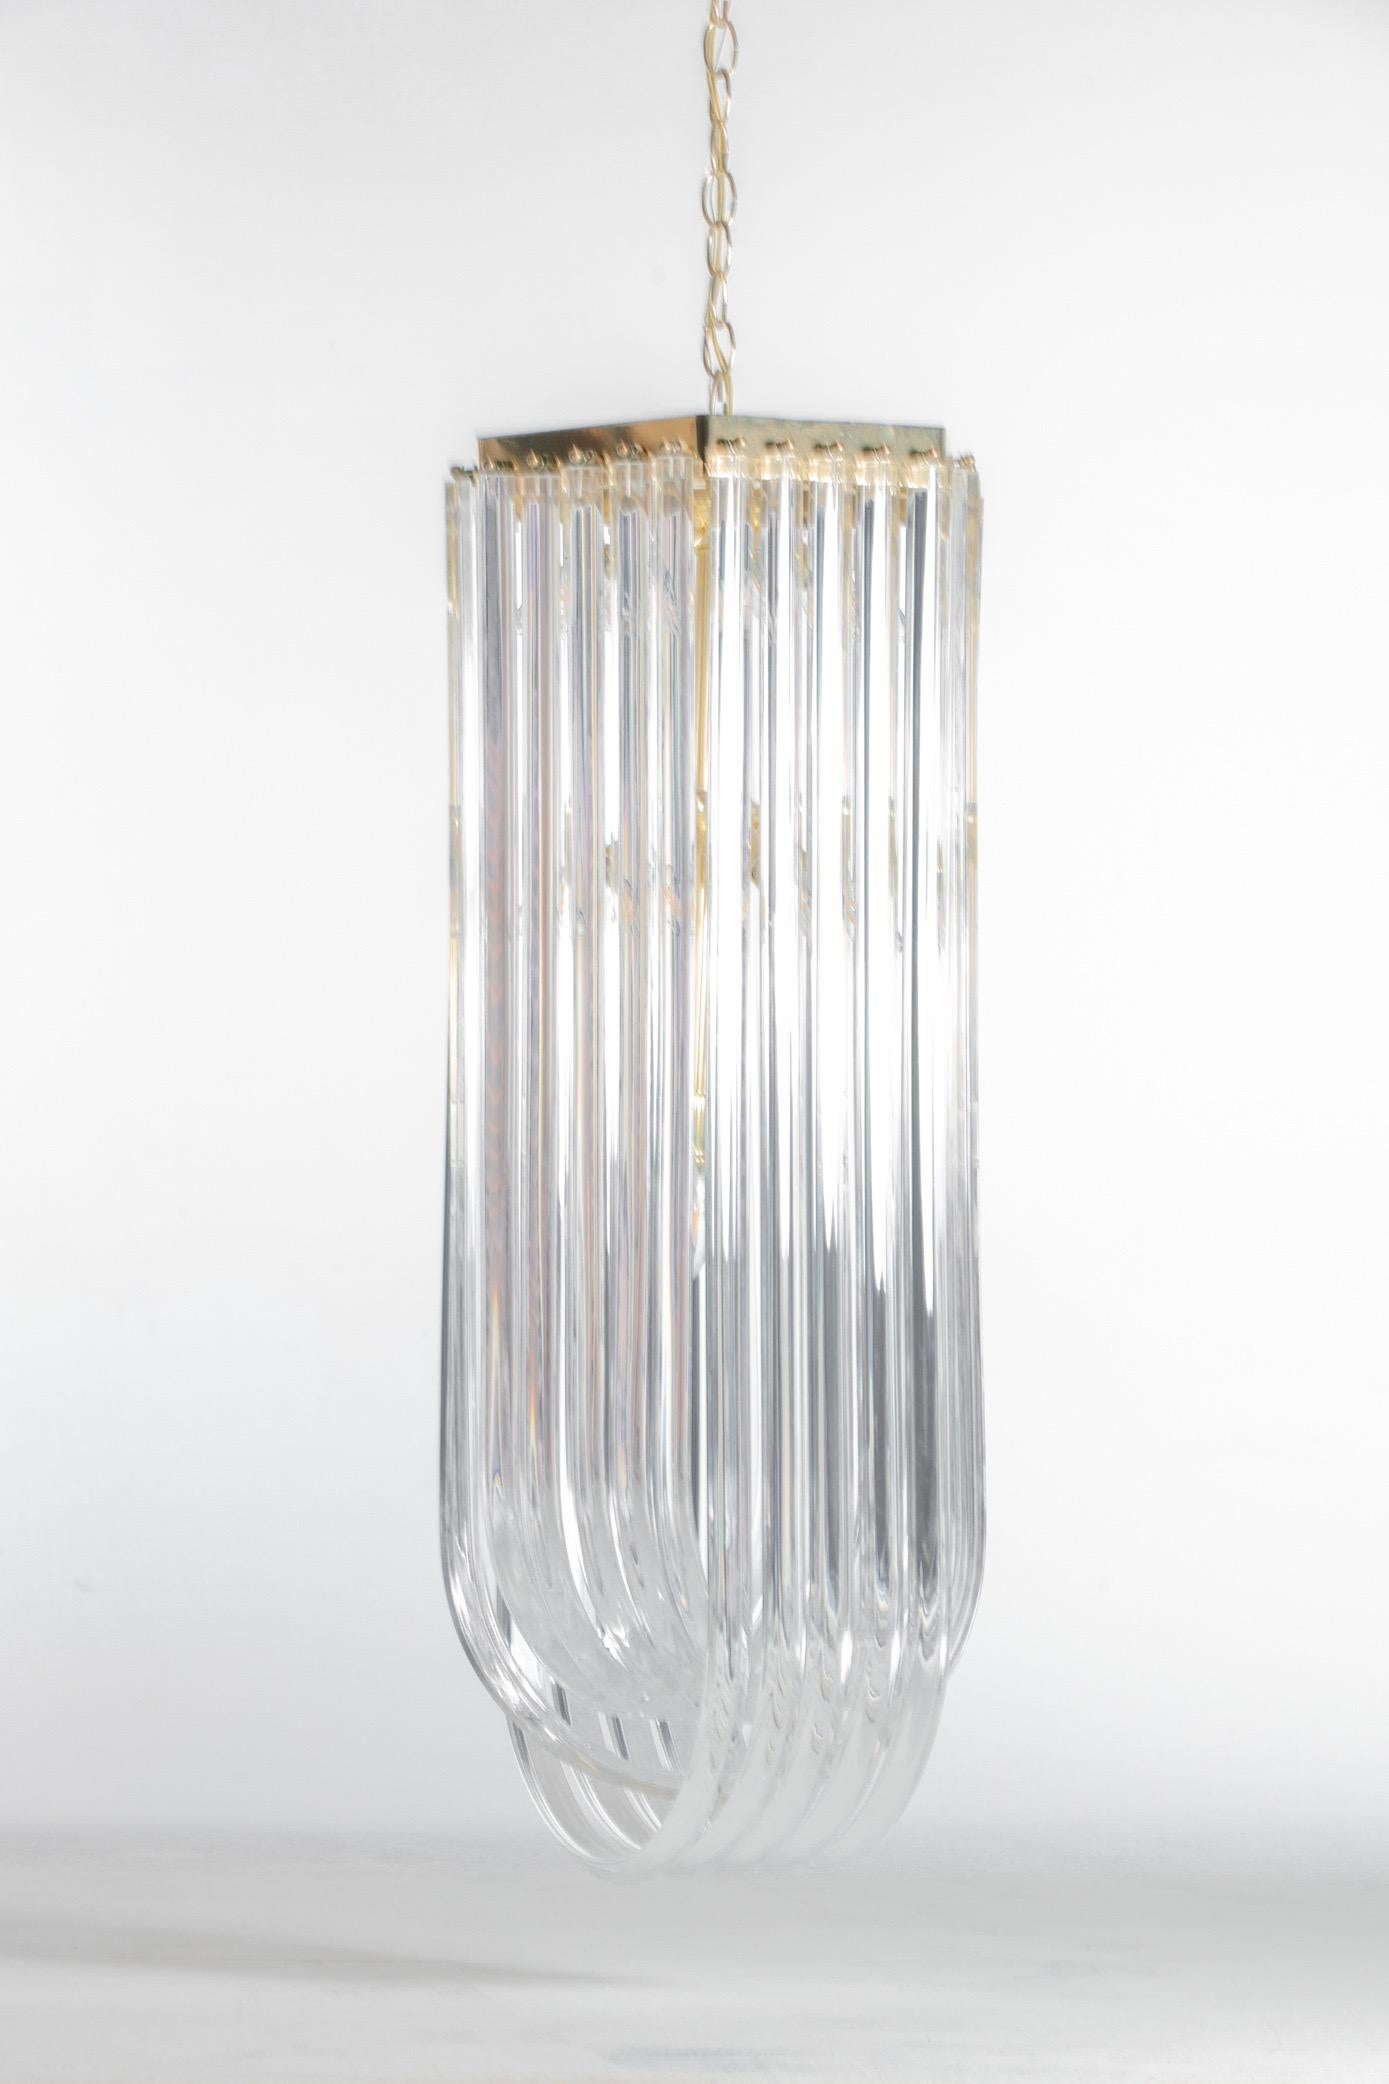 Lucite ribbon chandelier with brass frame. Sculptural interlocking ribbons of Lucite hang from a brass frame, circa 1970s. The fixture would be a statement piece in an entryway or stairwell, or any room with high ceilings. Want to see more beautiful